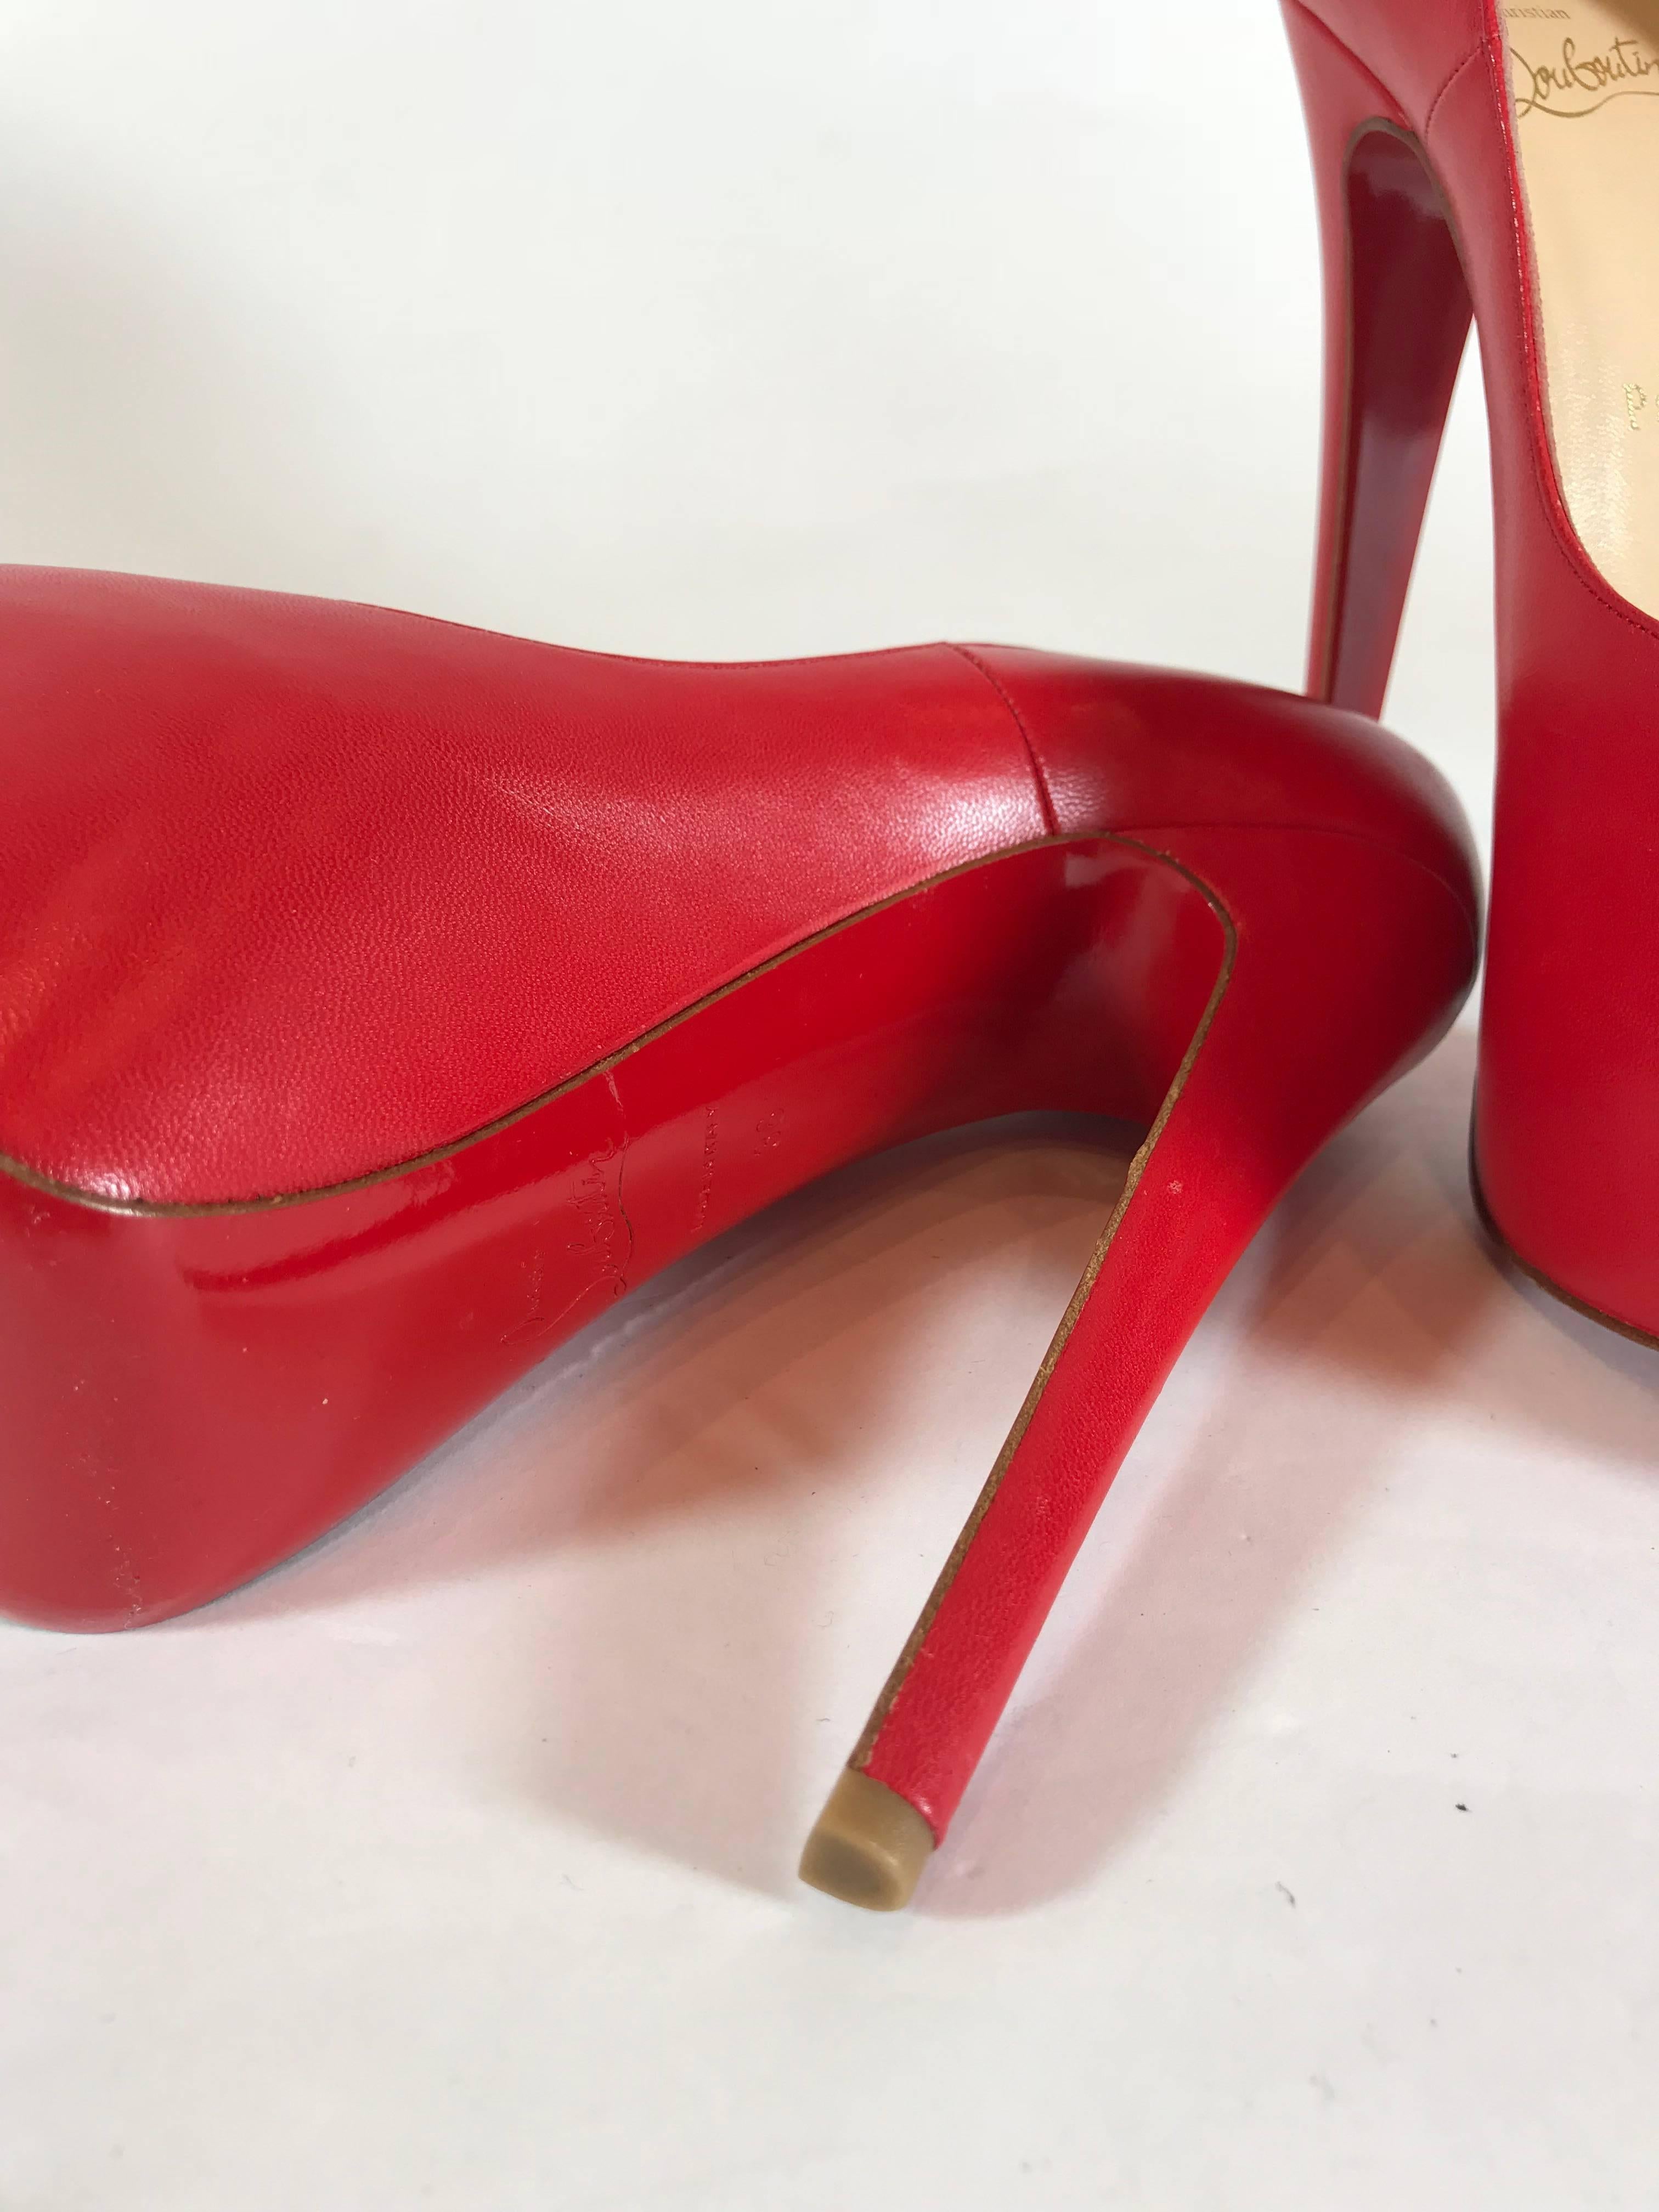 Christian Louboutin Daffodil Red Leather Pump For Sale 4